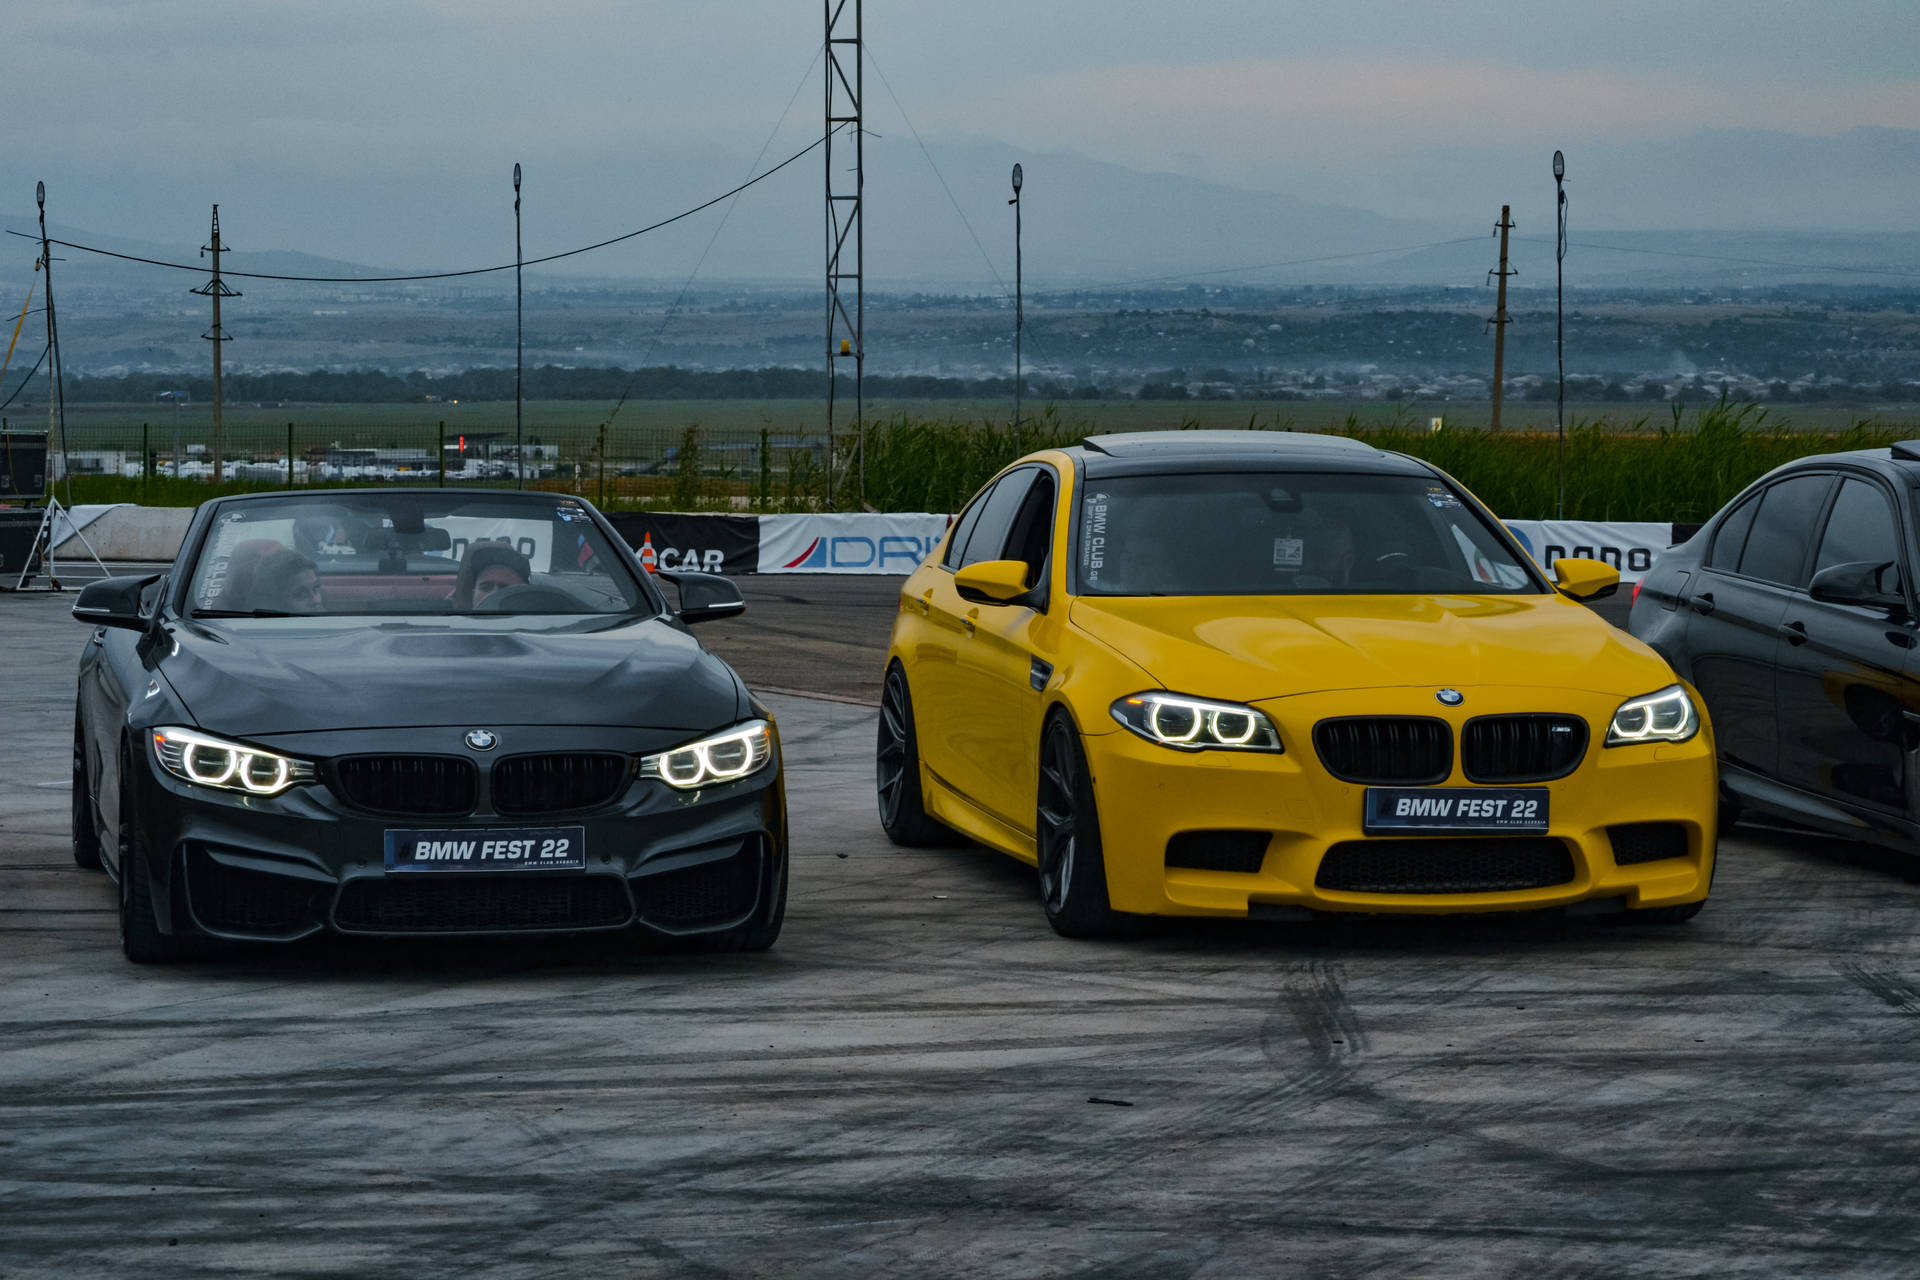 Bmw Cars At Racing Track